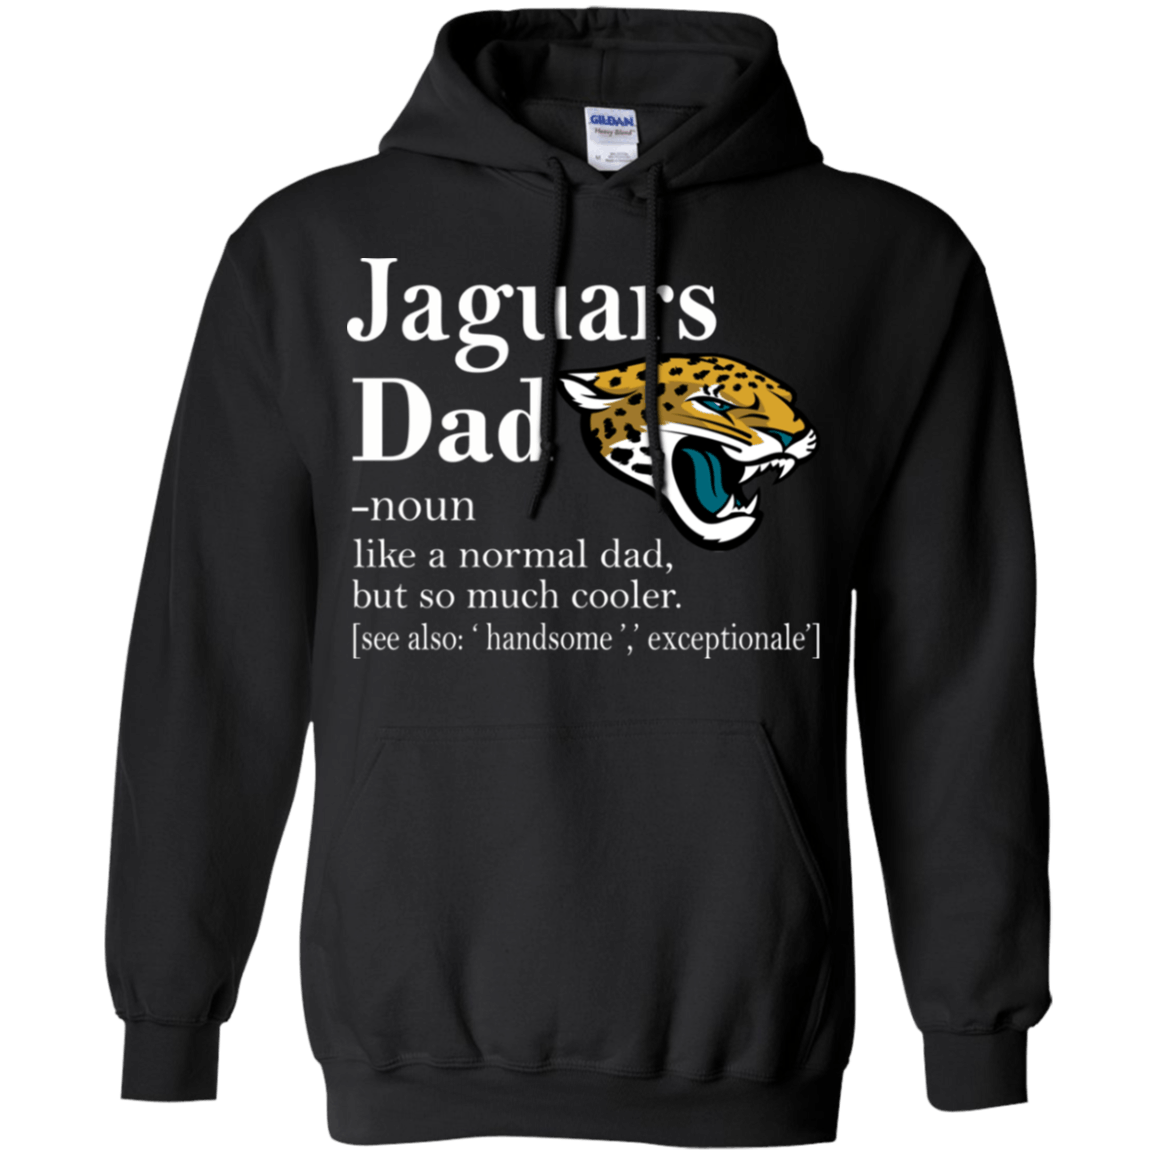 Jacksonville Jaguars Like A Normal Dad But So Much Cooler shirt Hoodie